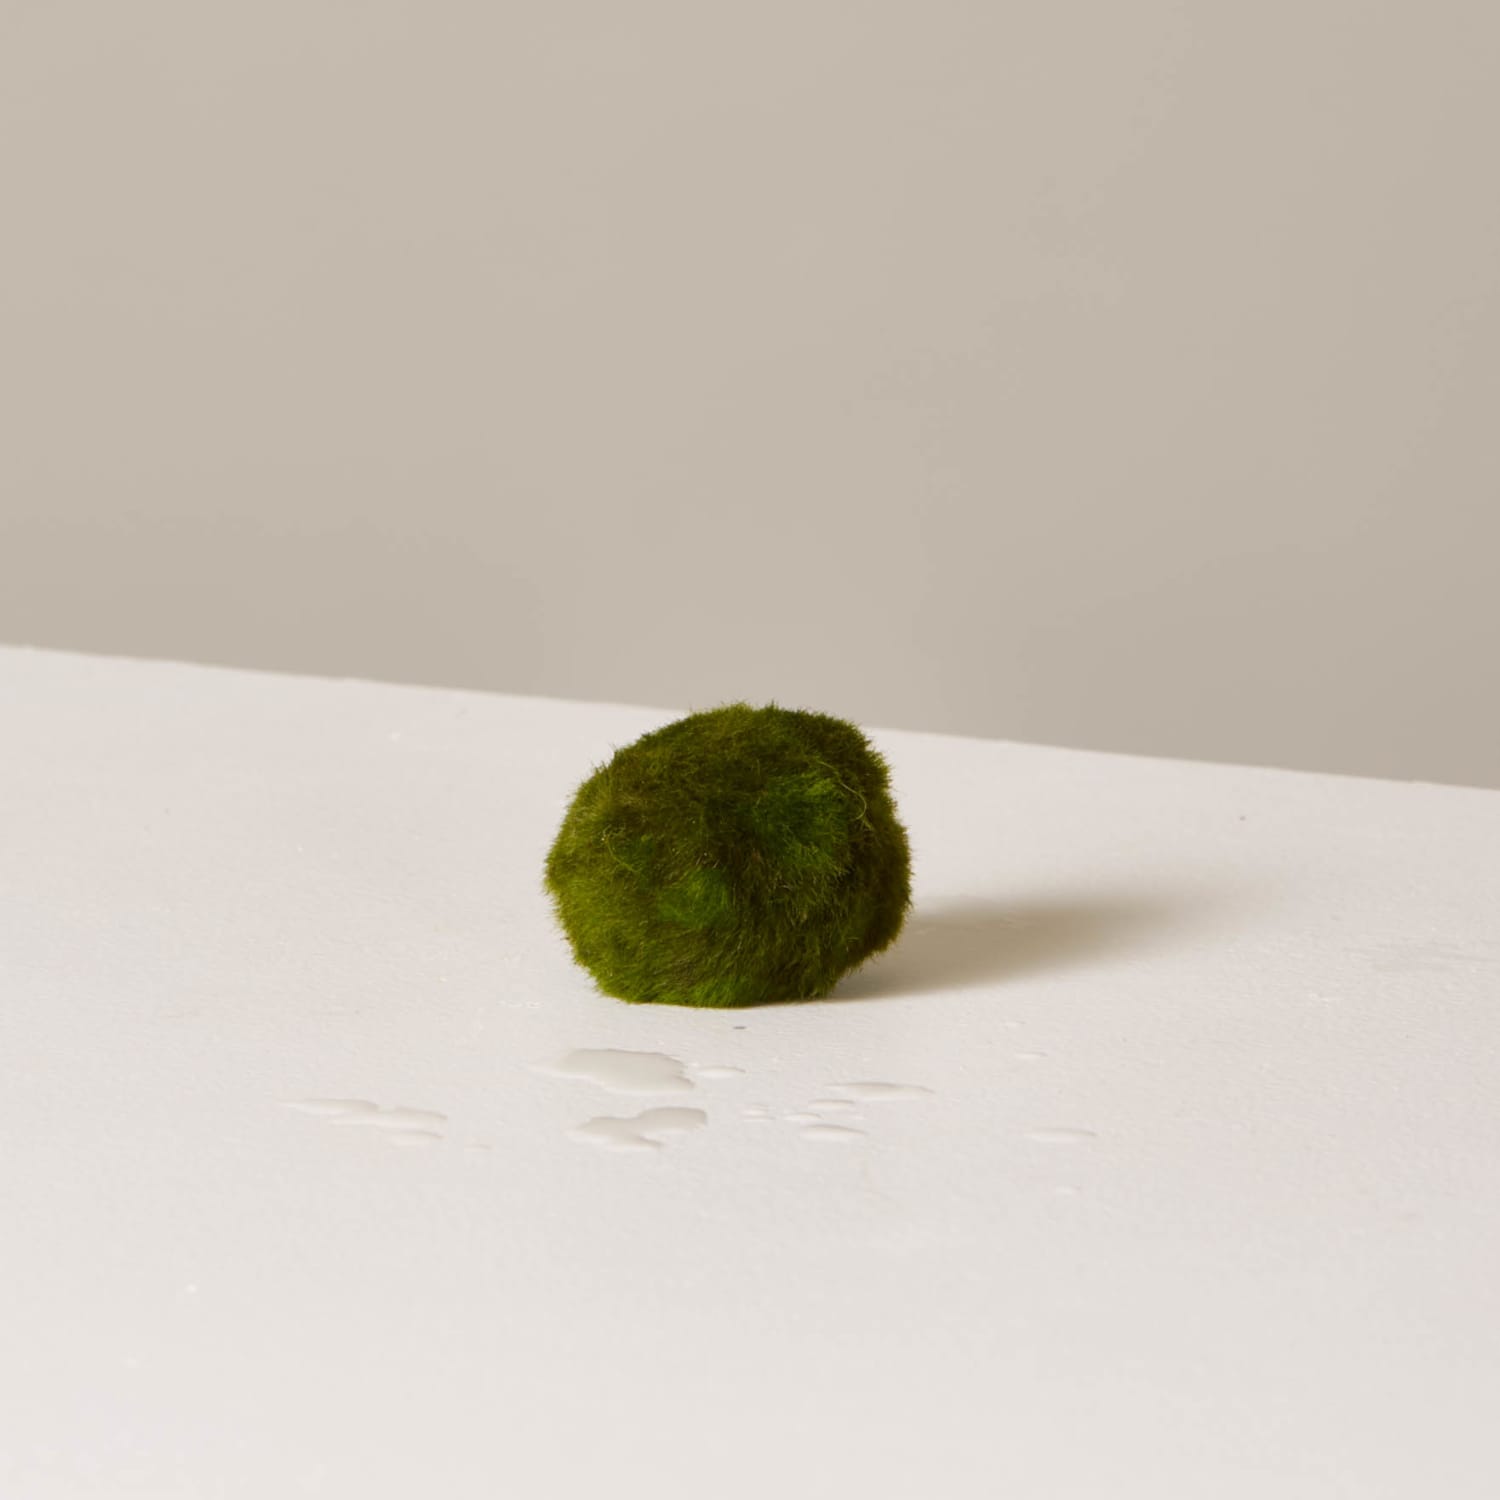 How to Grow and Care for Marimo Moss